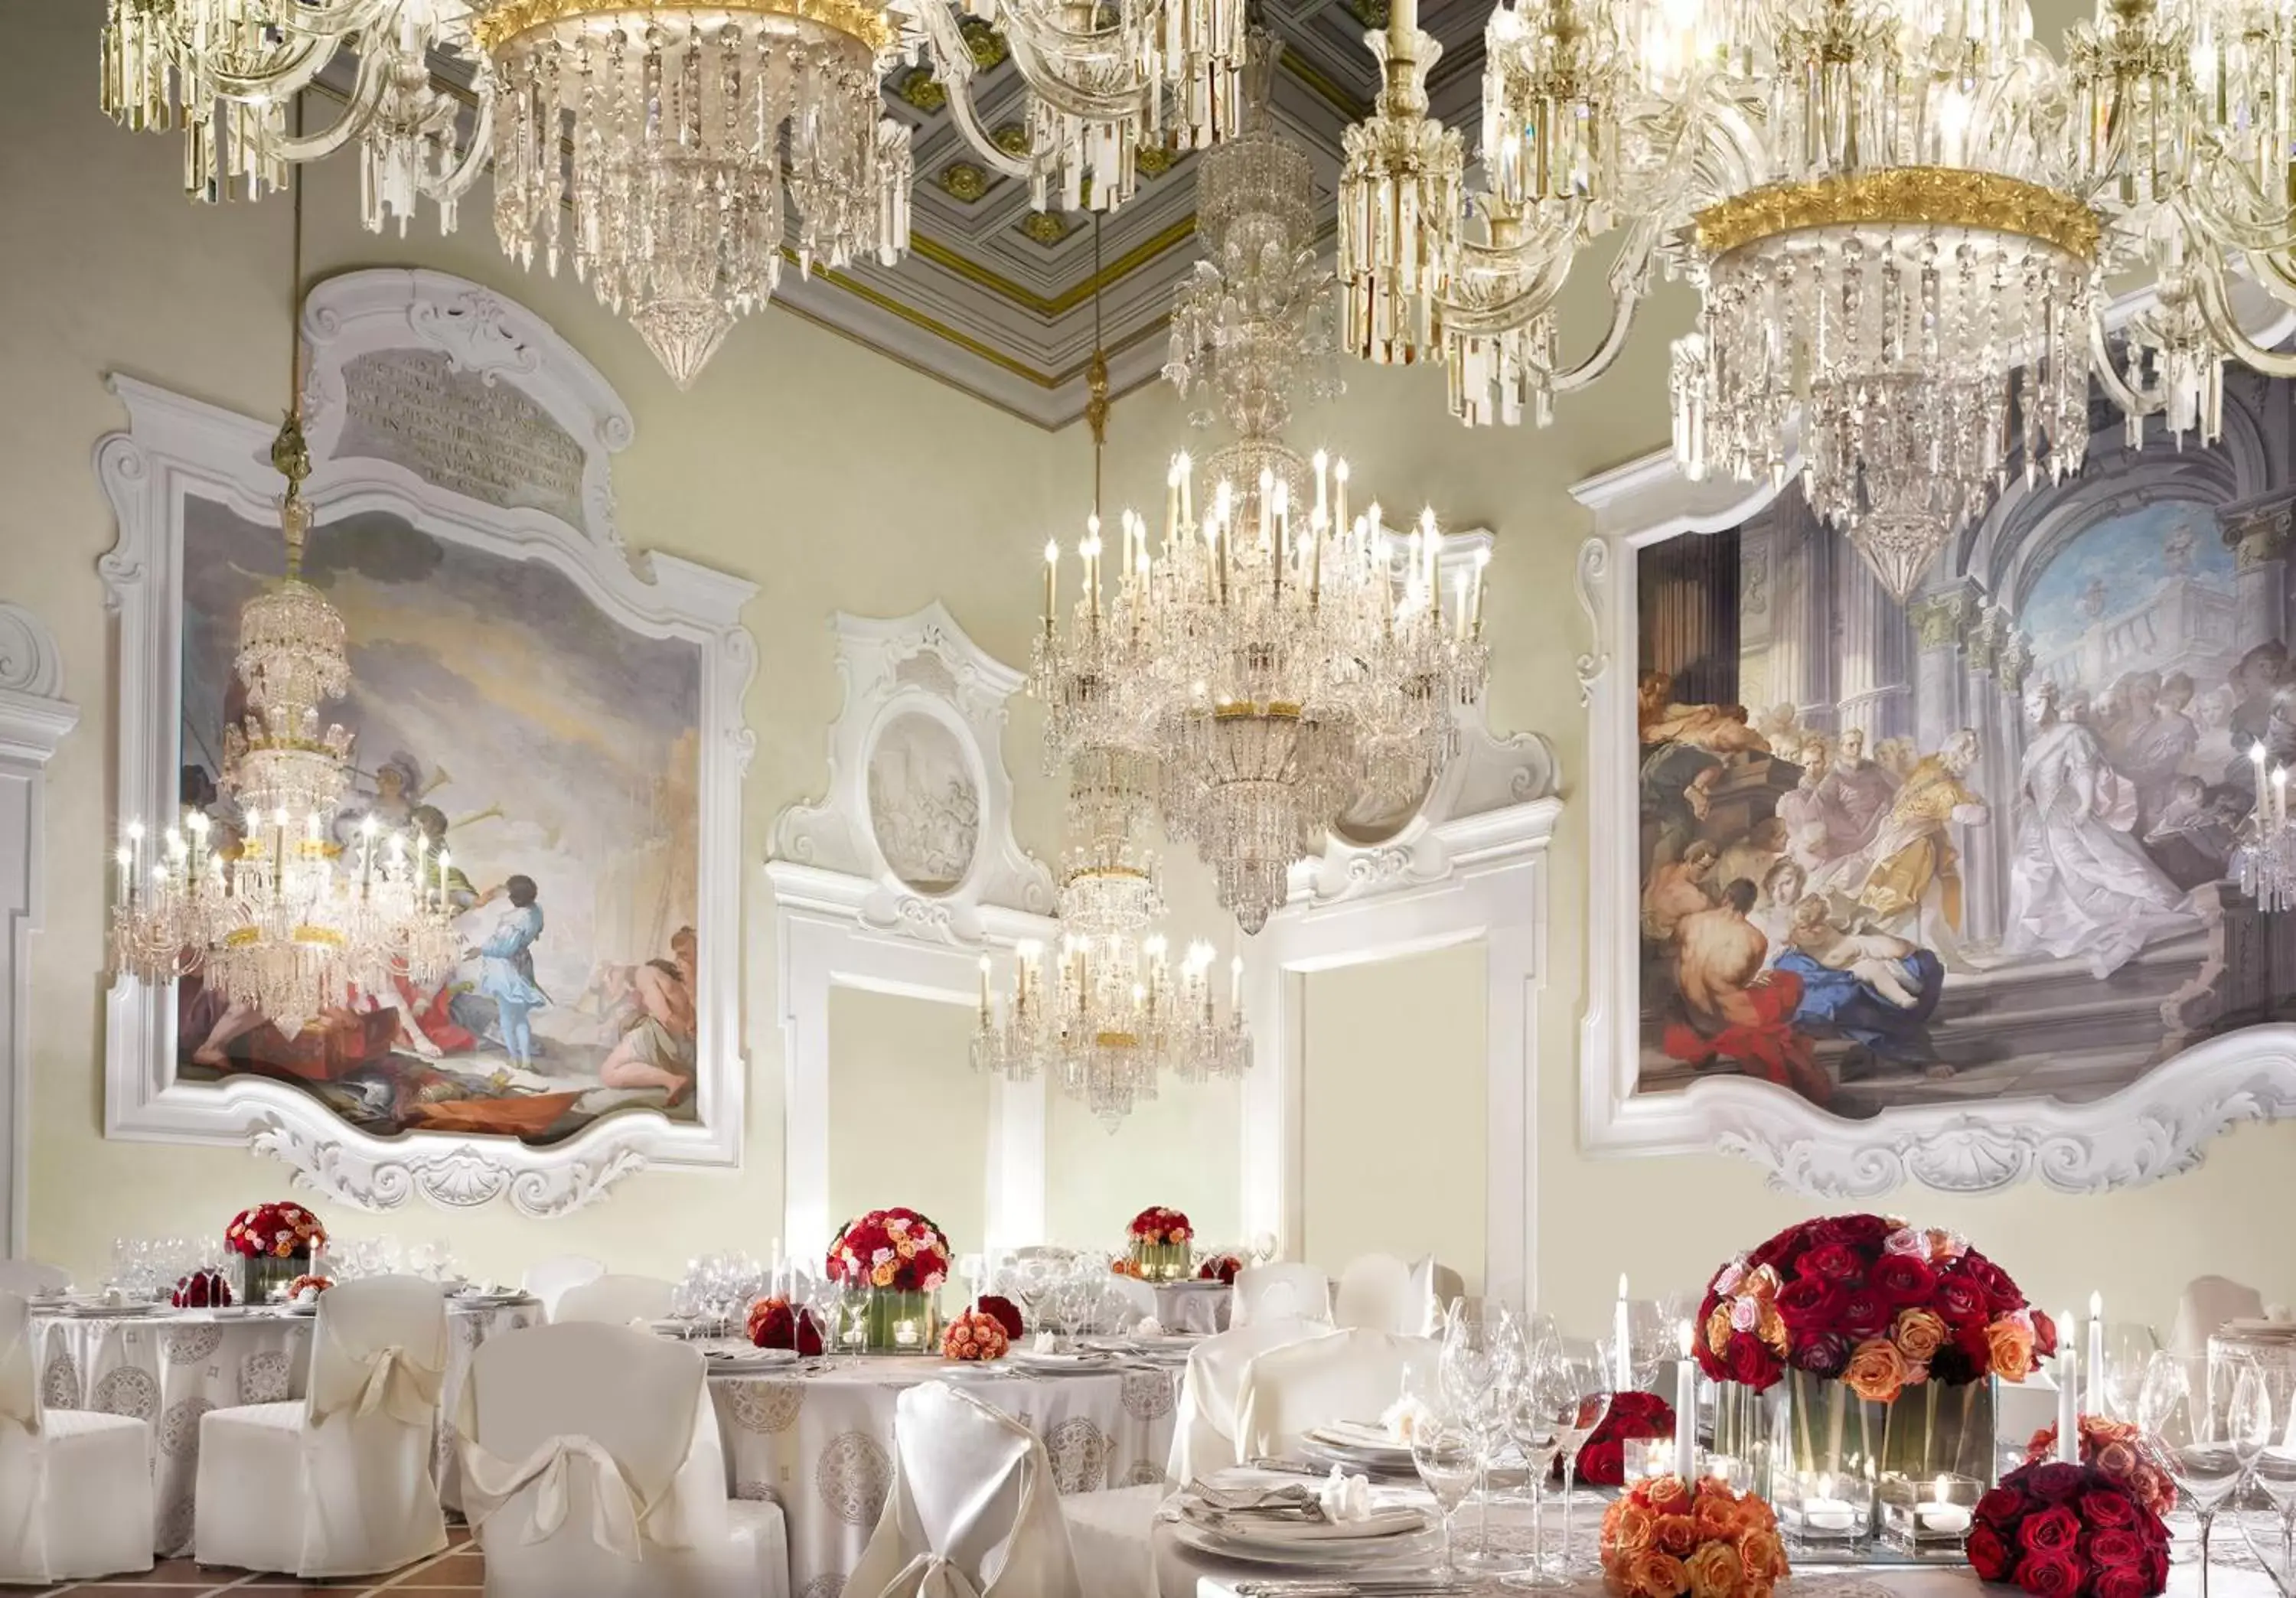 Banquet/Function facilities, Banquet Facilities in Four Seasons Hotel Firenze